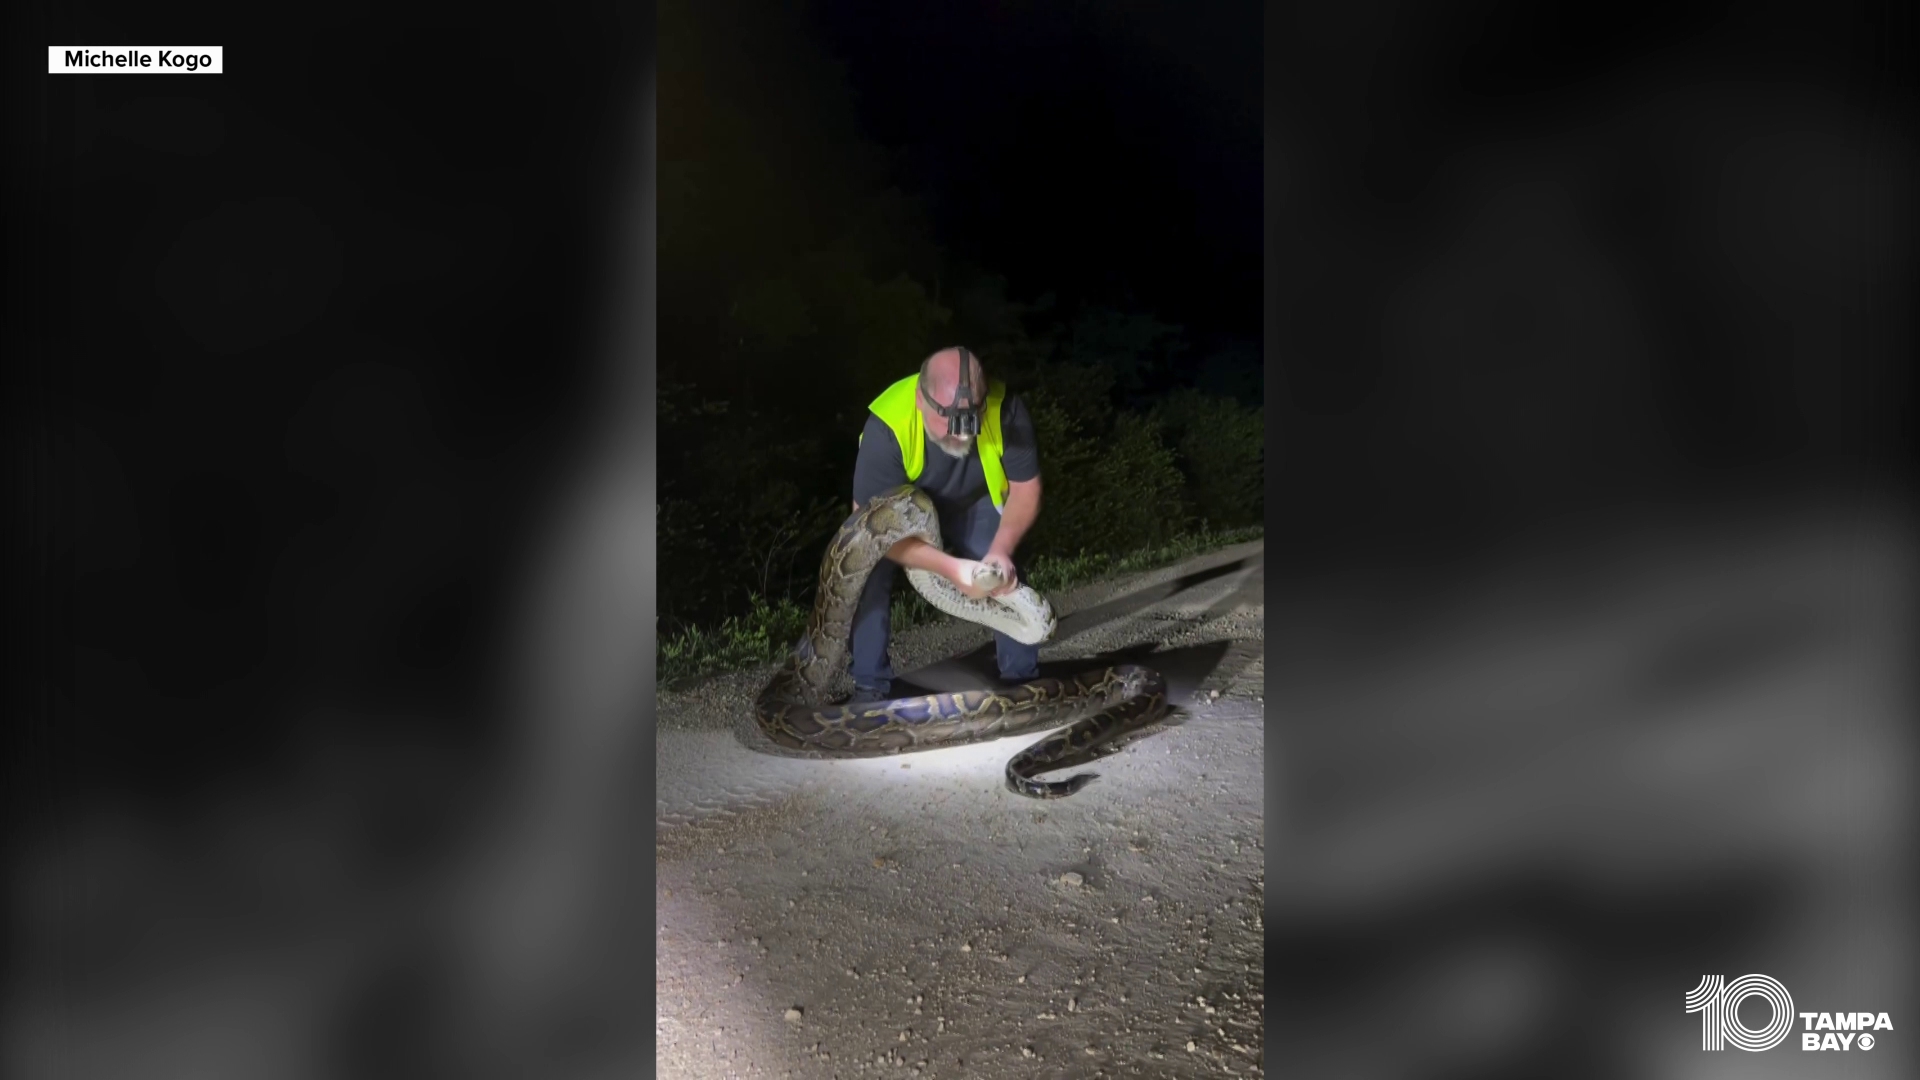 The python hunter grabbed the snake with his bare hands and wrangled it on a dirt road in the Everglades.